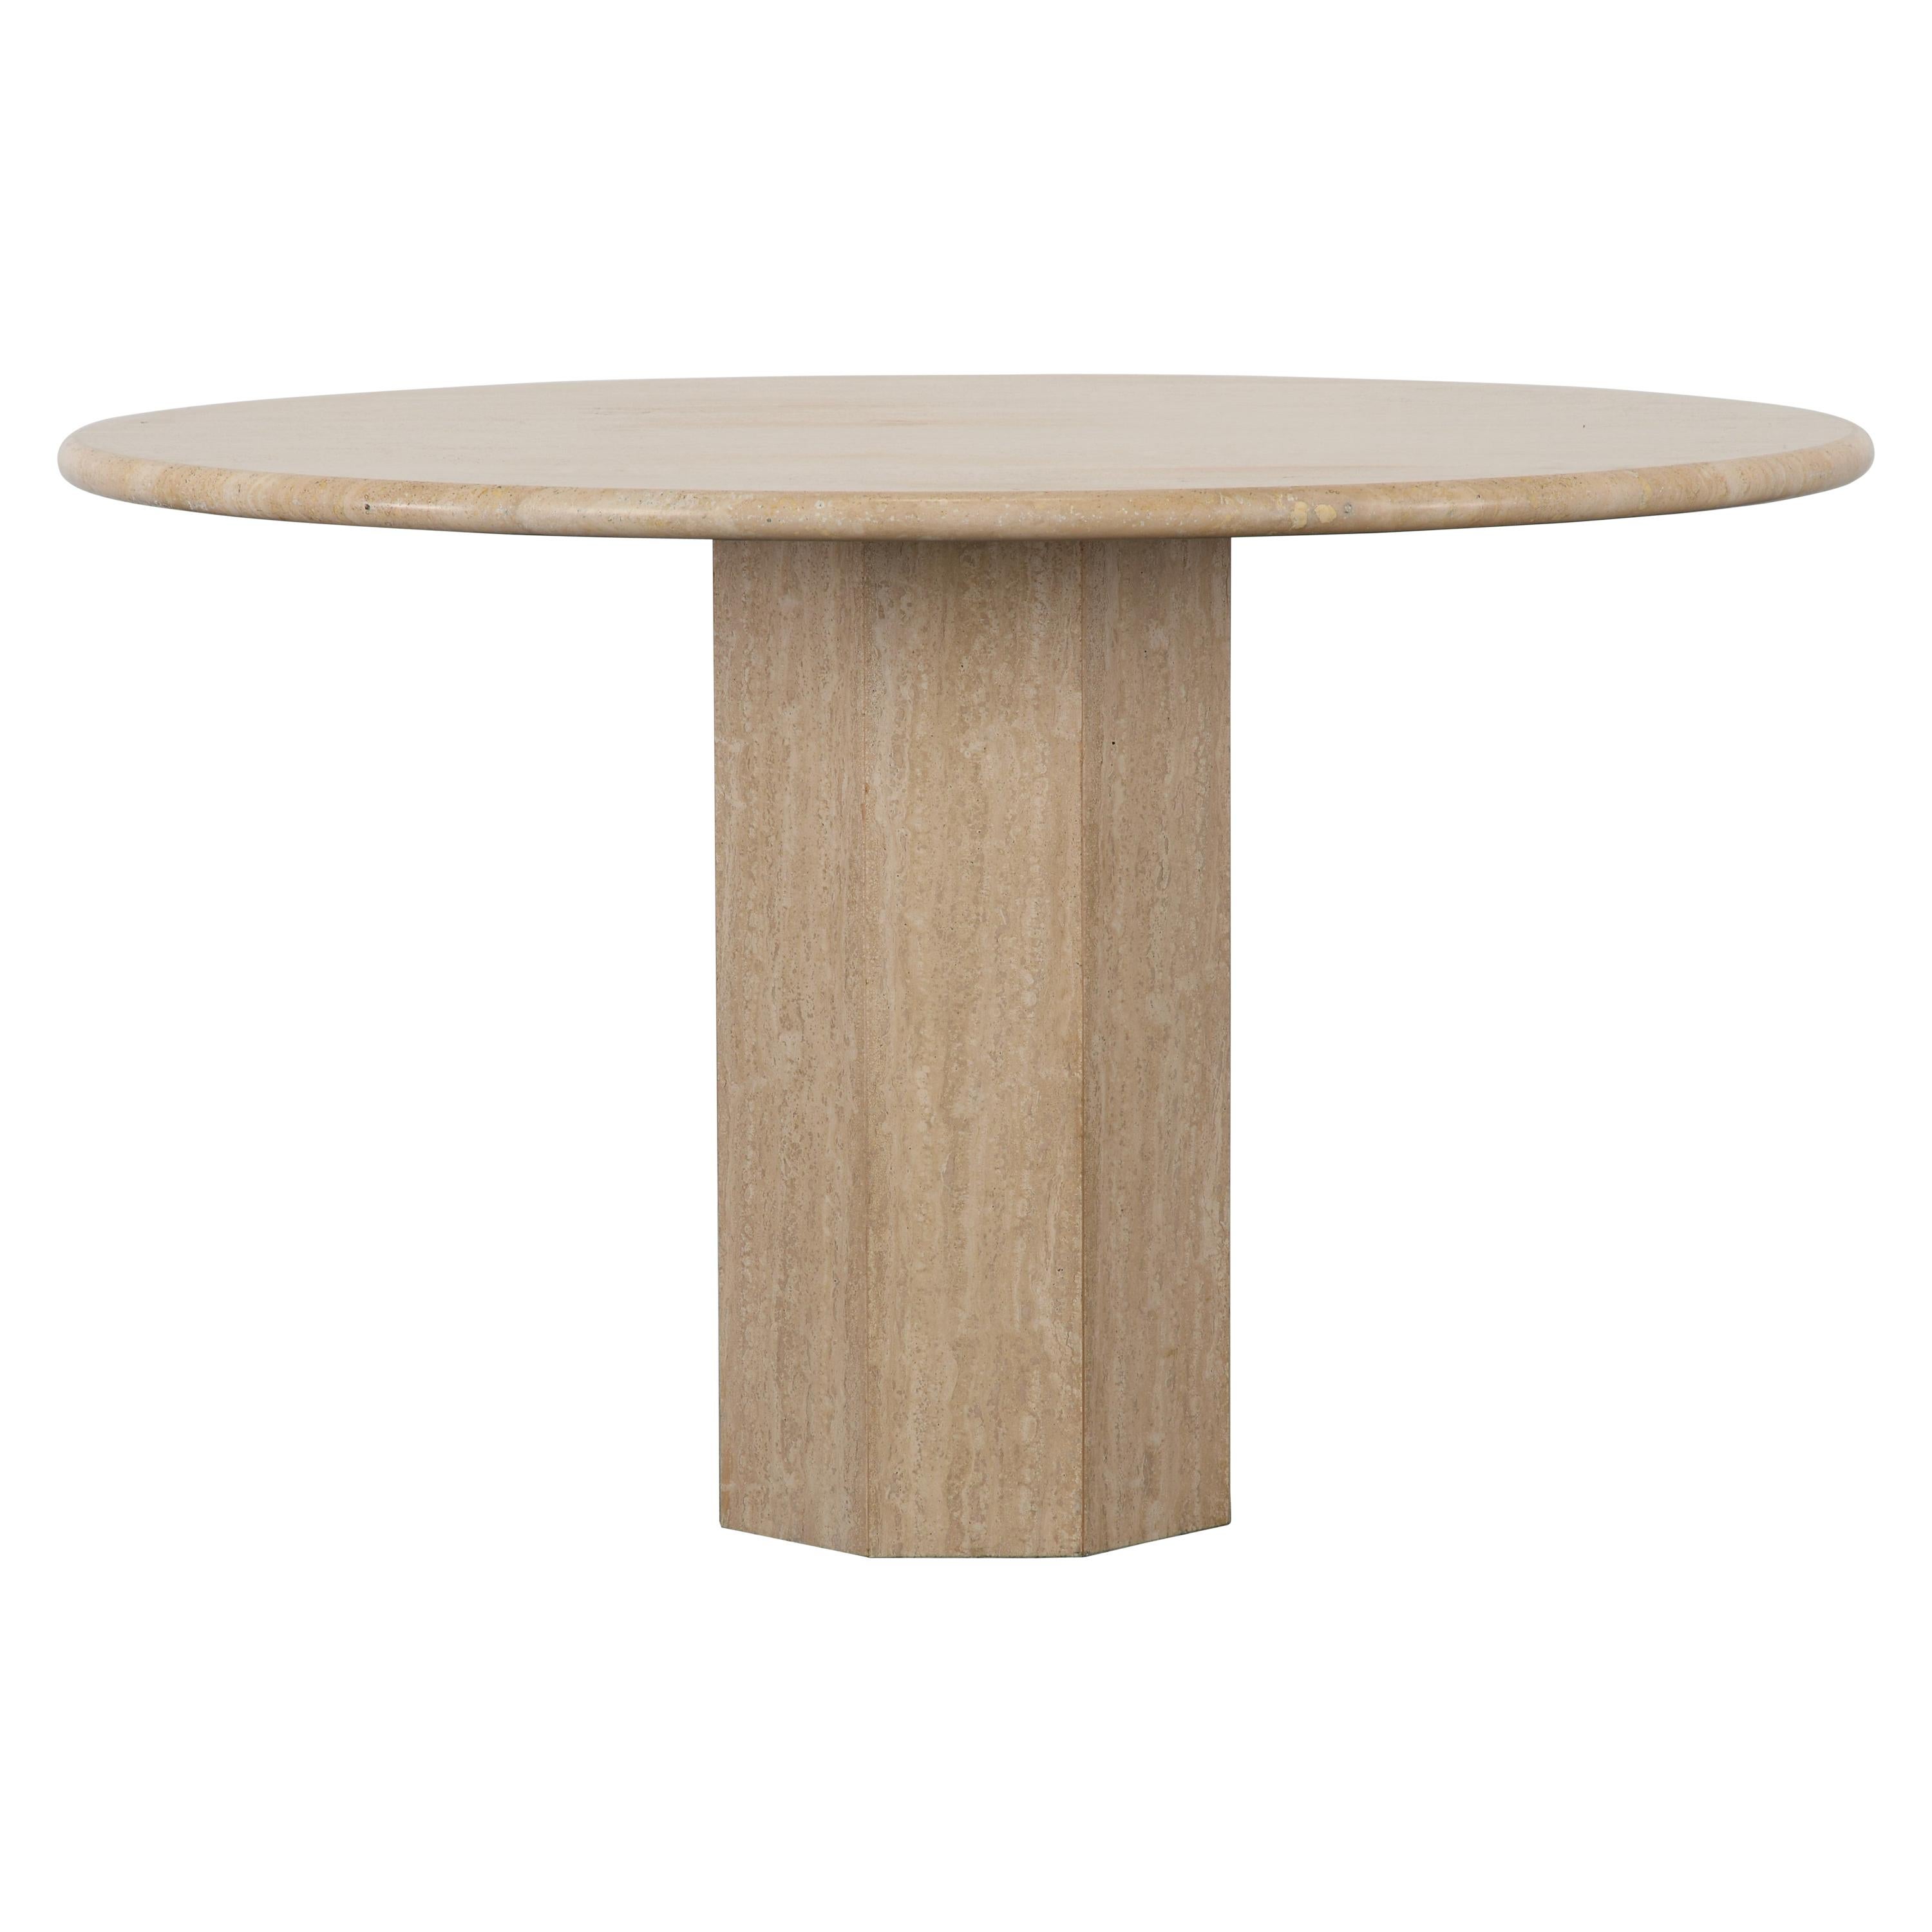 Roche Bobois Style Travertine Round Dining Table, 1980s